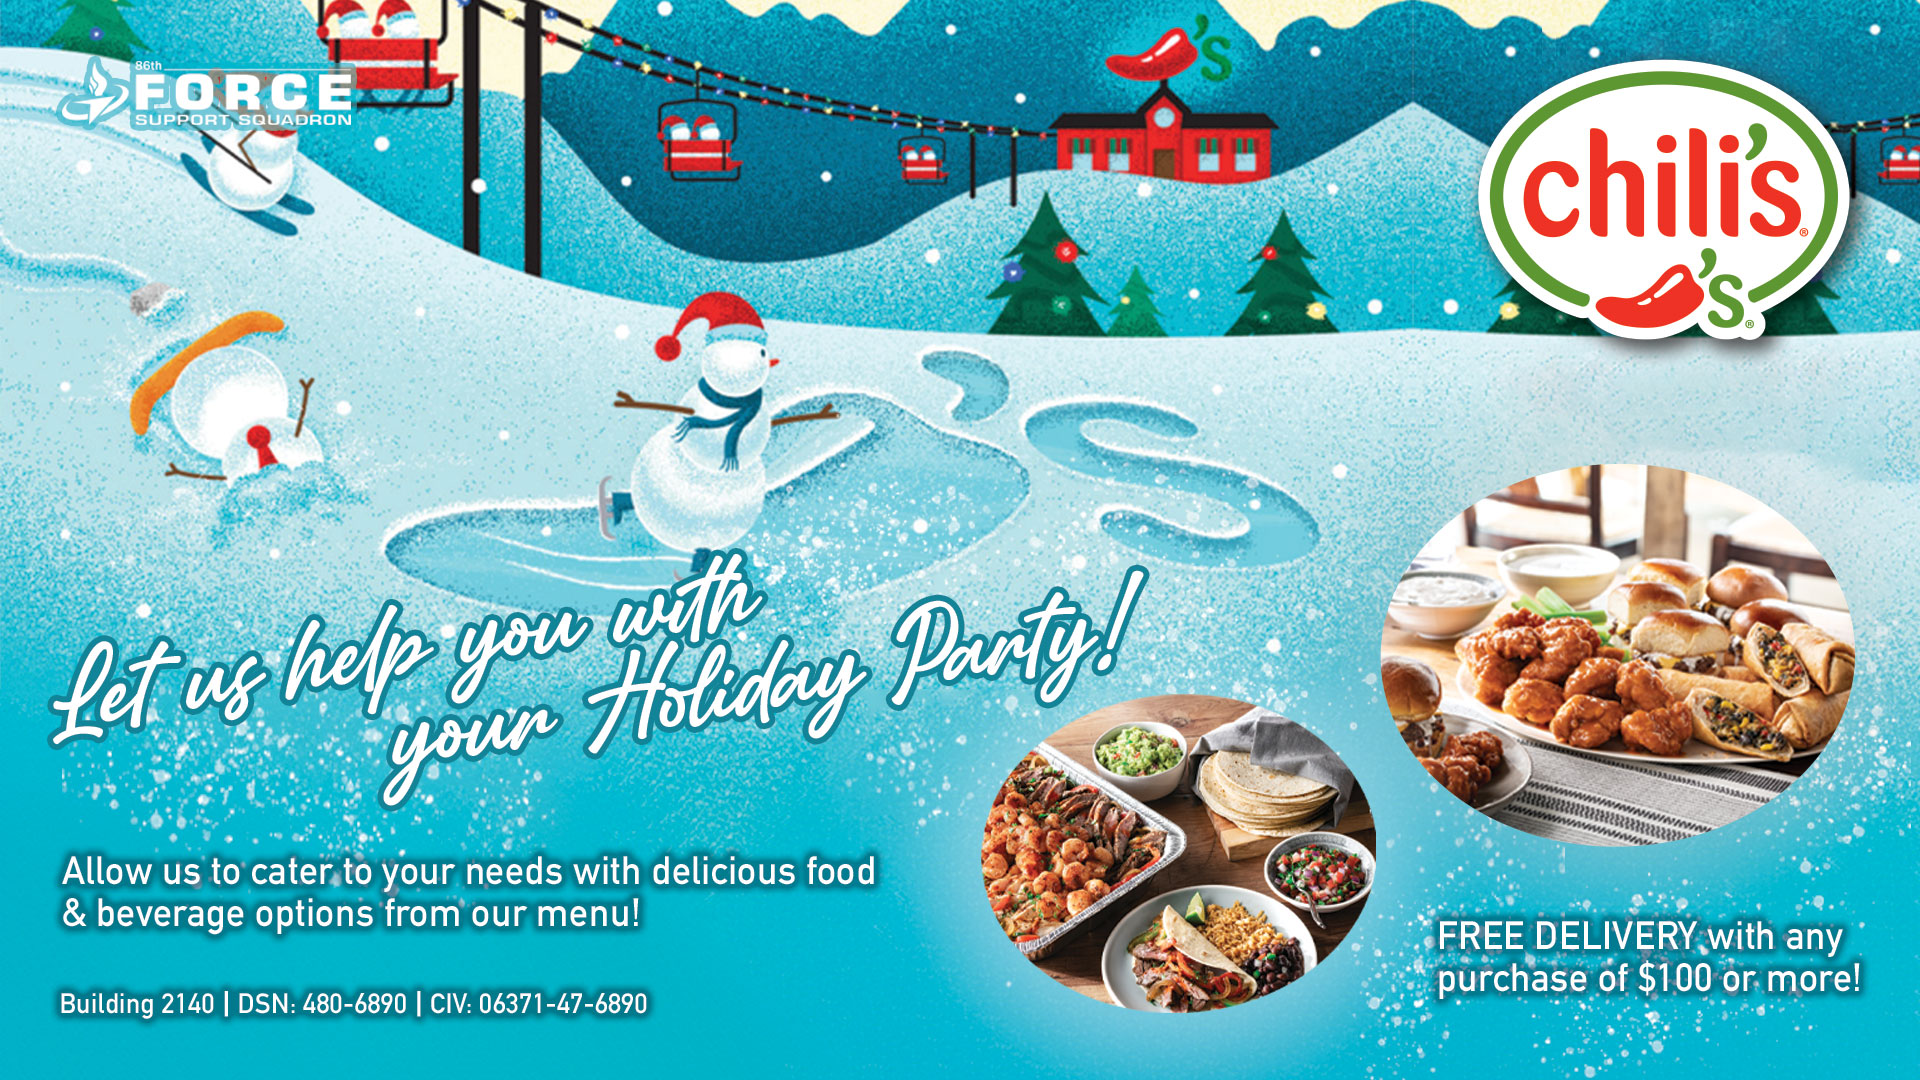 12_00_TVSLIDE_Chilis_ChristmasPartyCatering